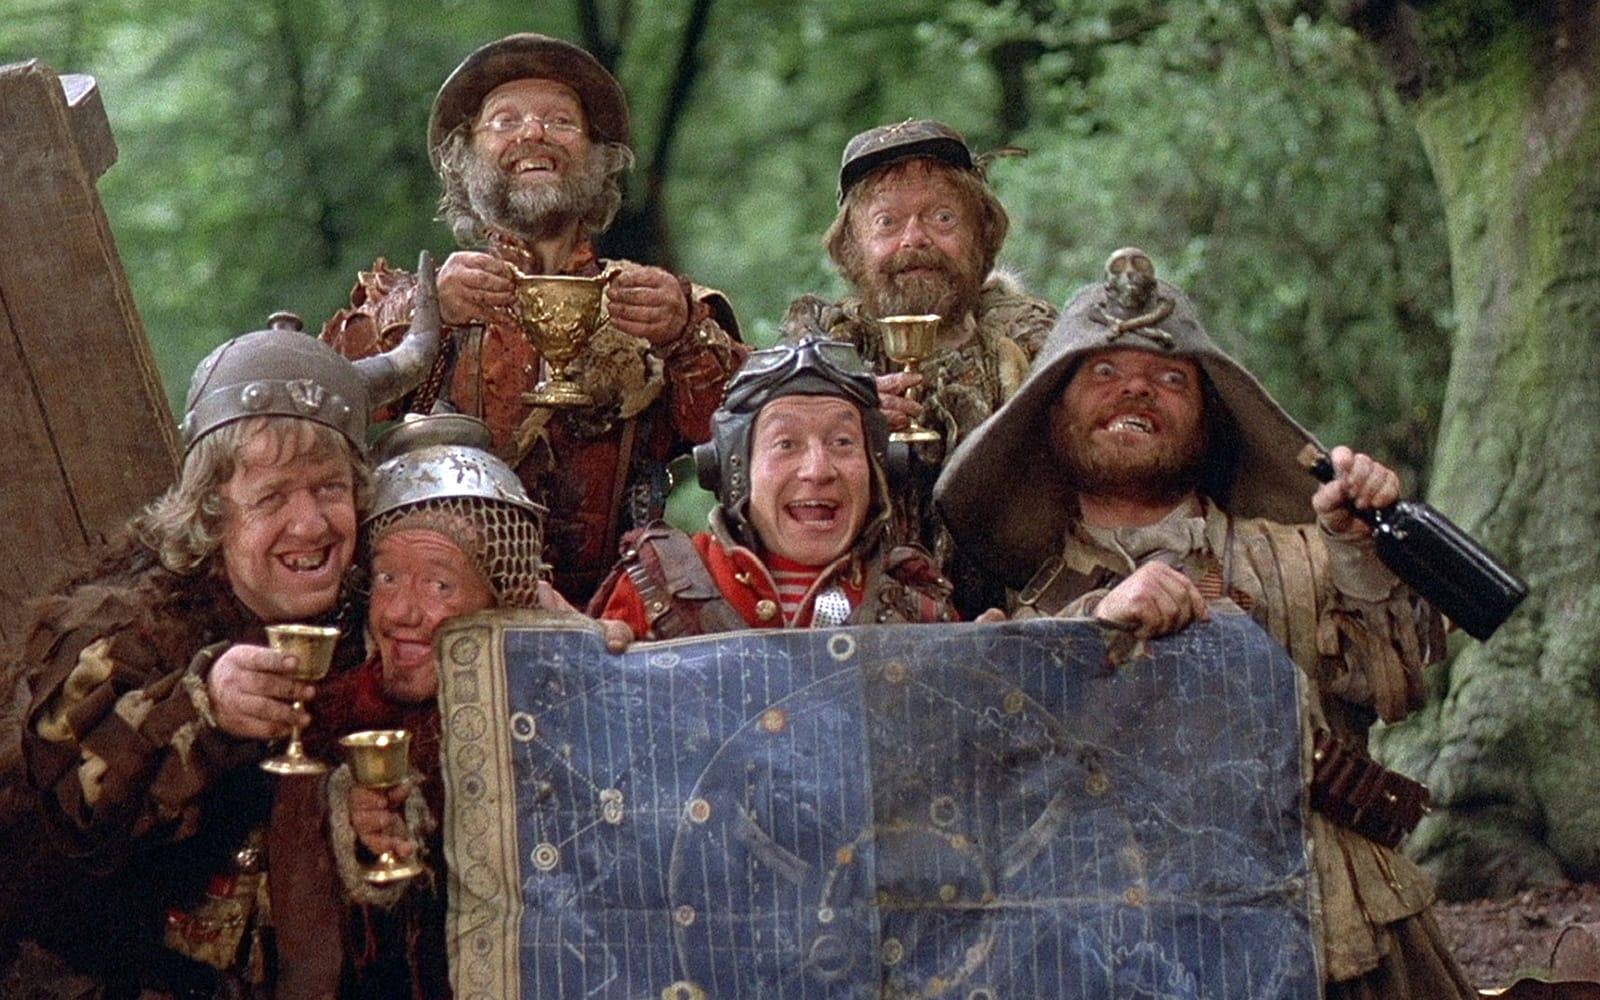 Time Bandits - Terry Gilliam